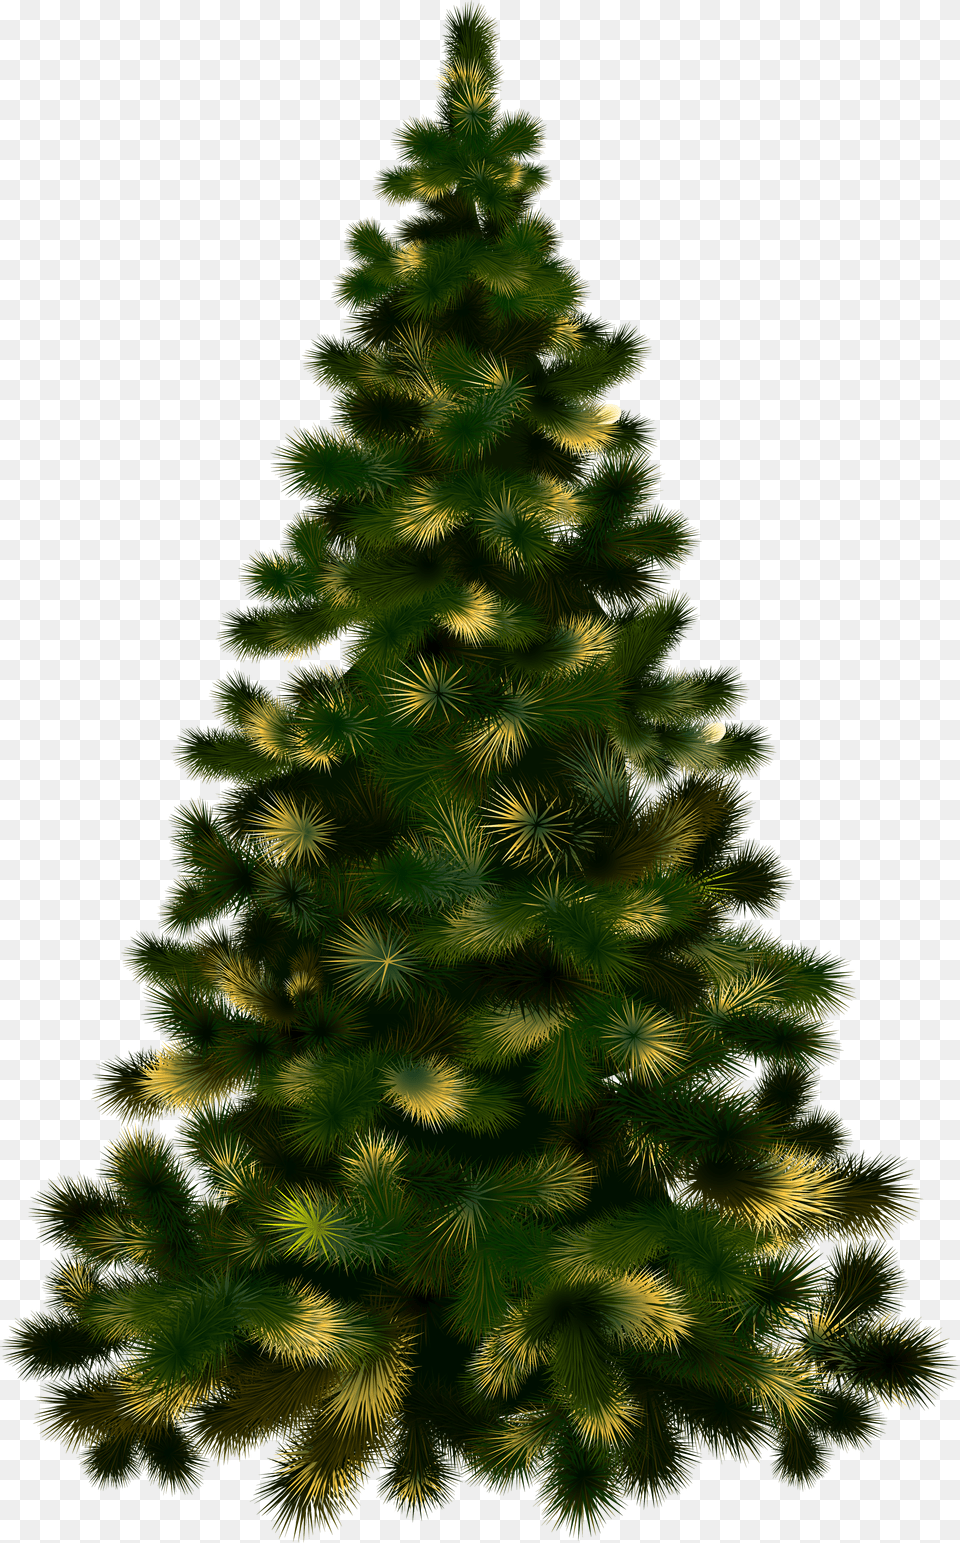 Christmas Tree Without Lights Image Purepng Christmas Tree Real Free Transparent Png